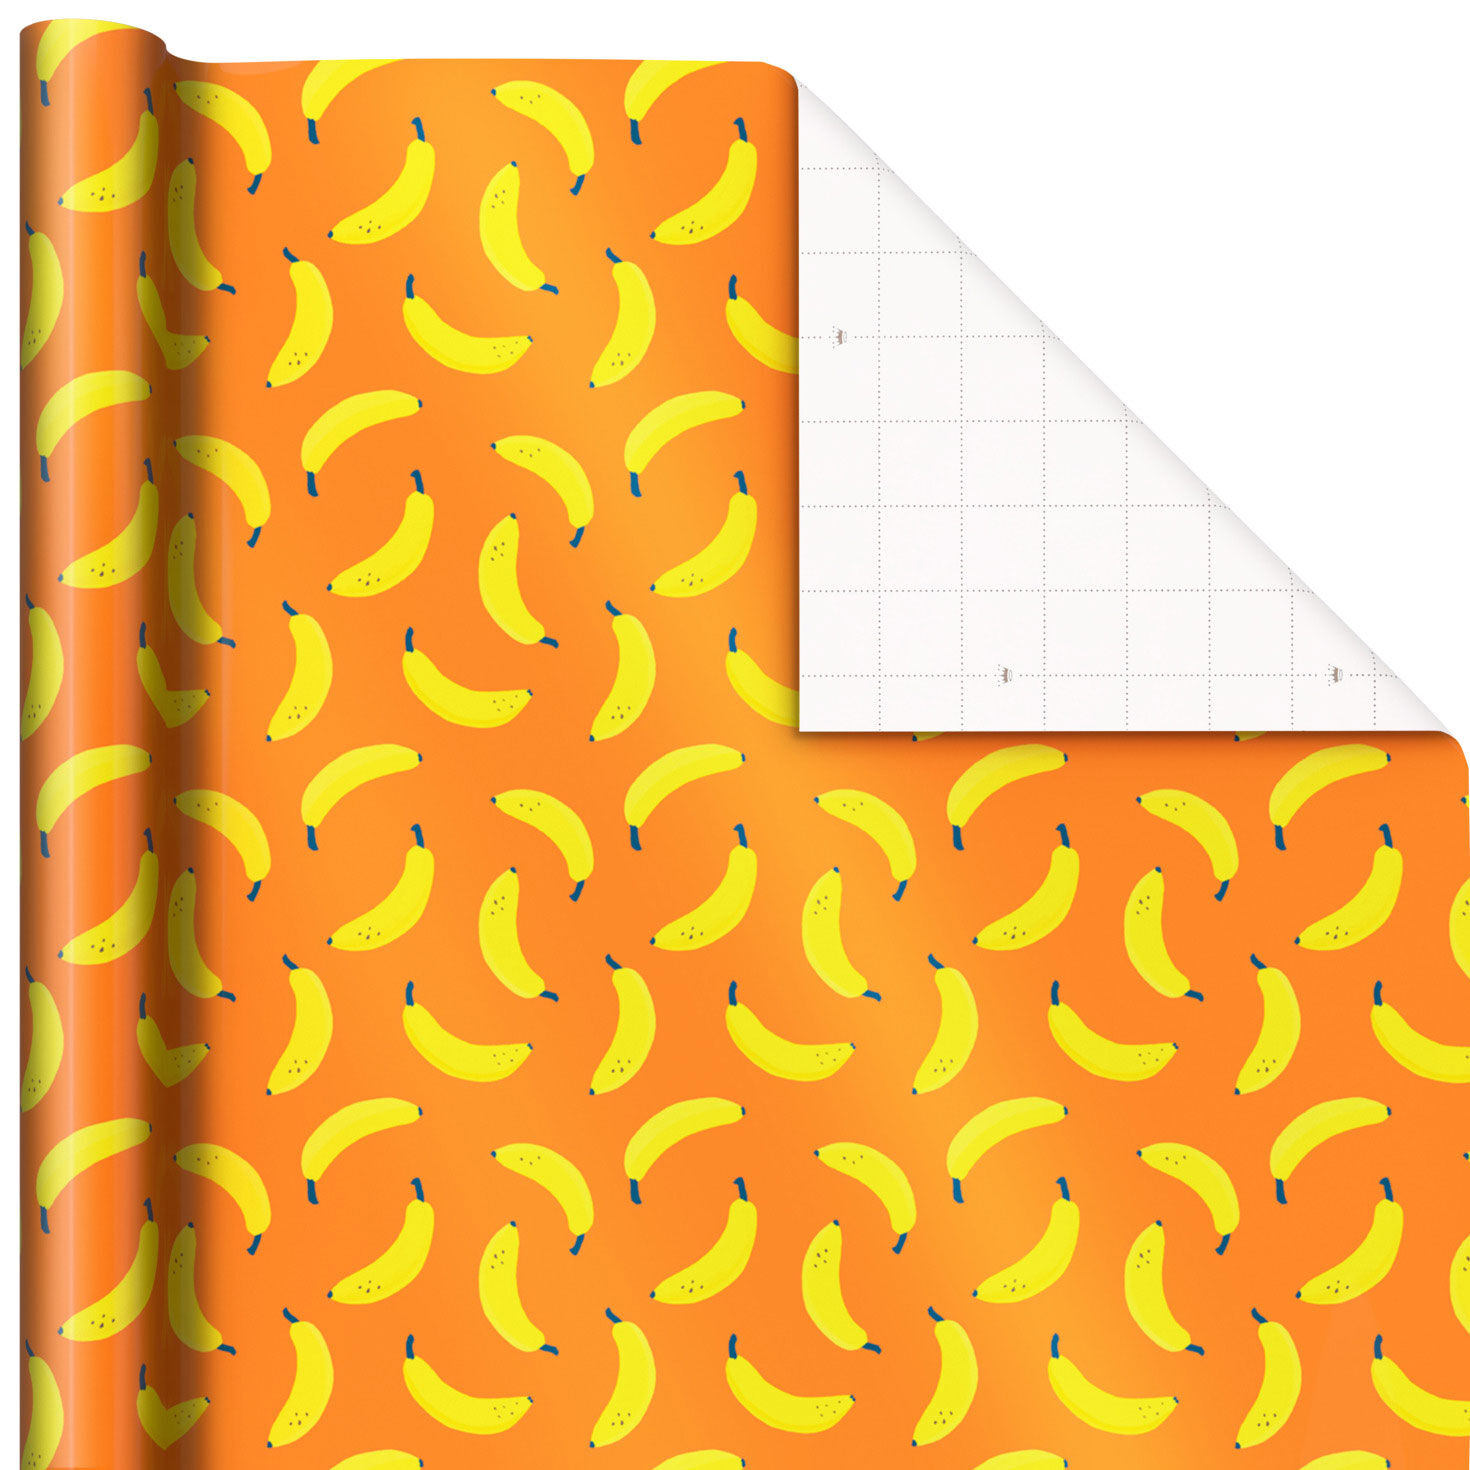 Bananas on Orange Wrapping Paper, 20 sq. ft. - Wrapping Paper